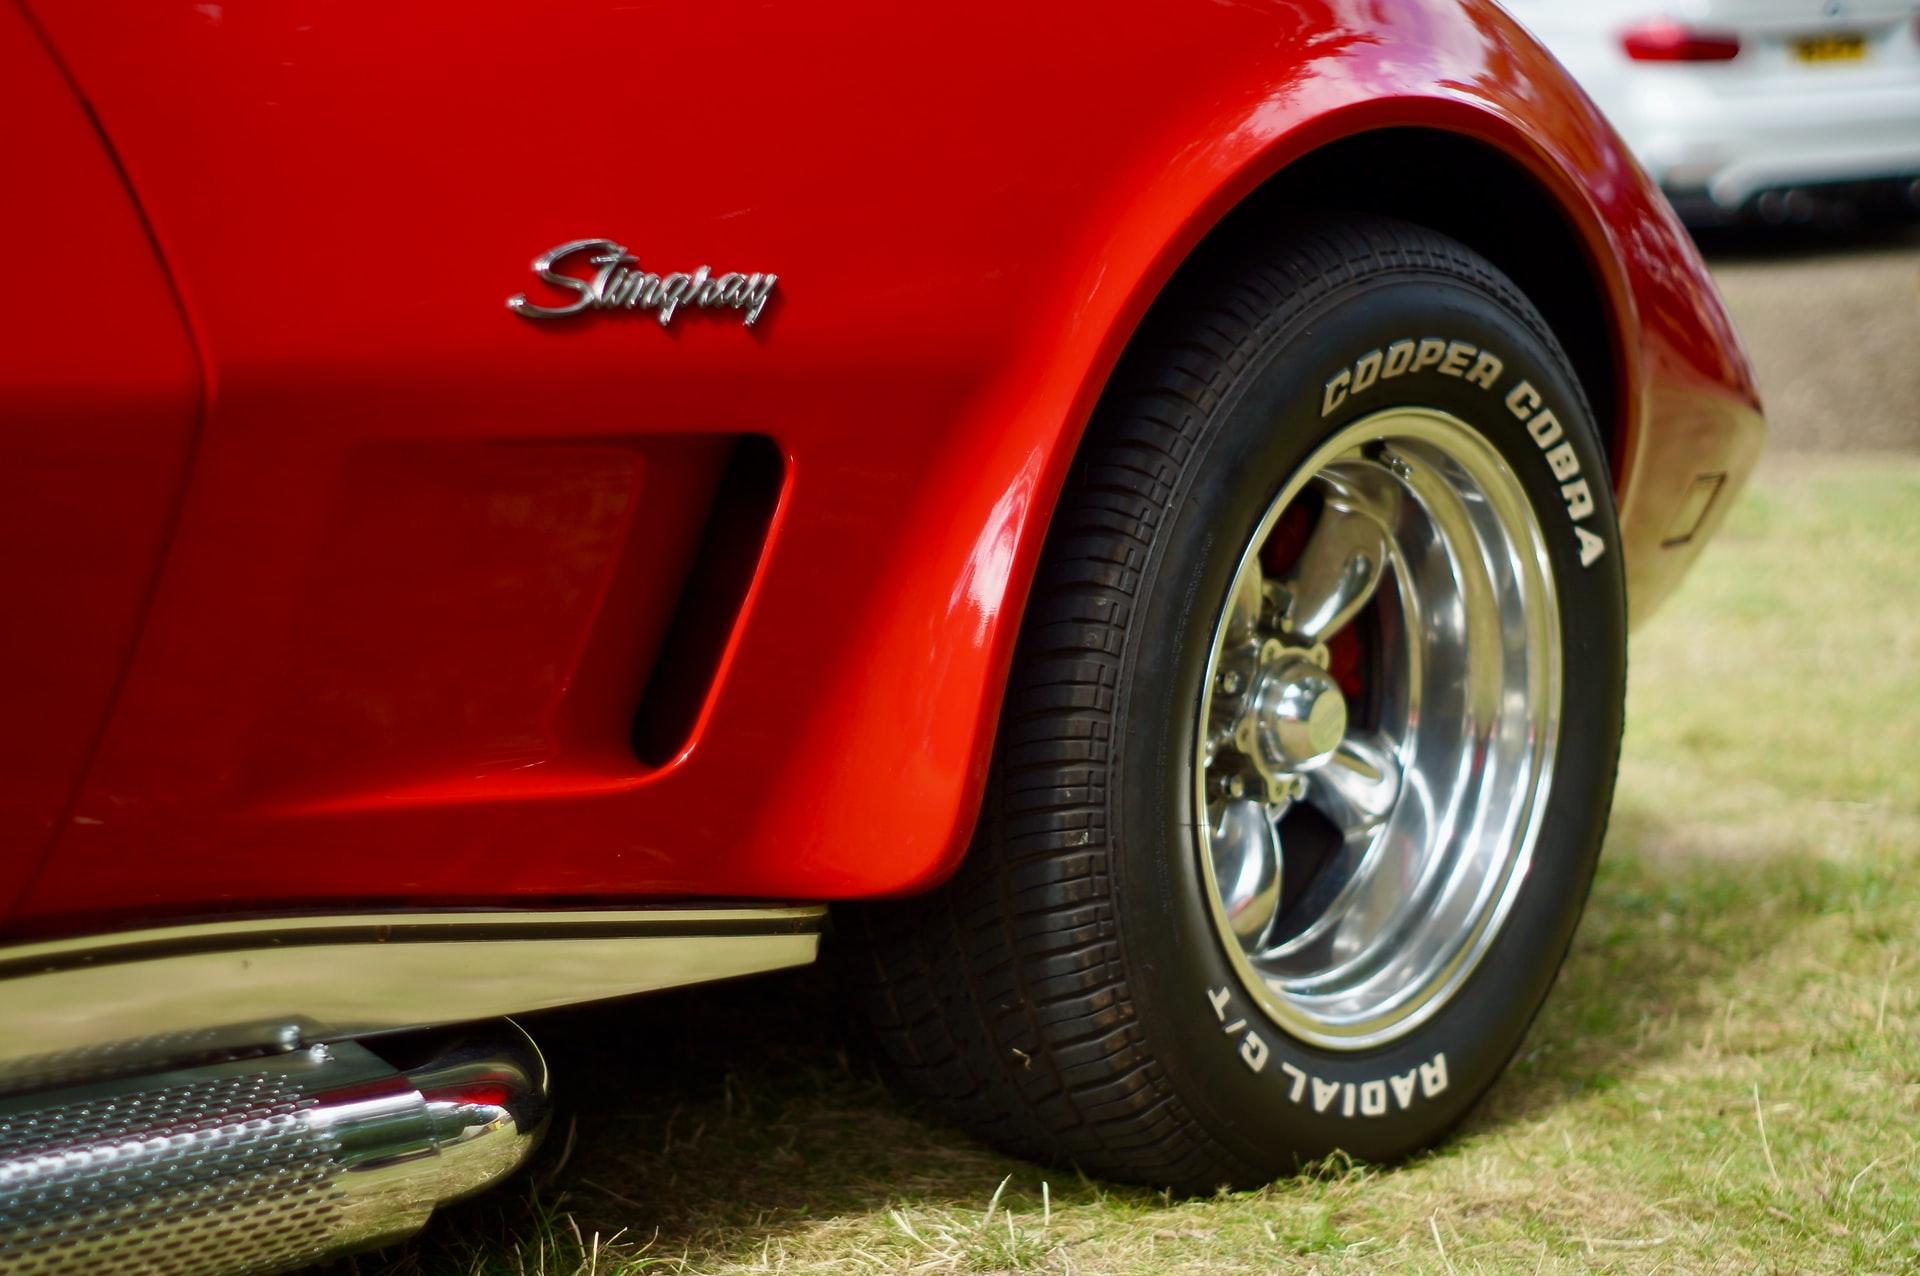 Lower body and wheel of a red Corvette with a silver Stingray nameplate